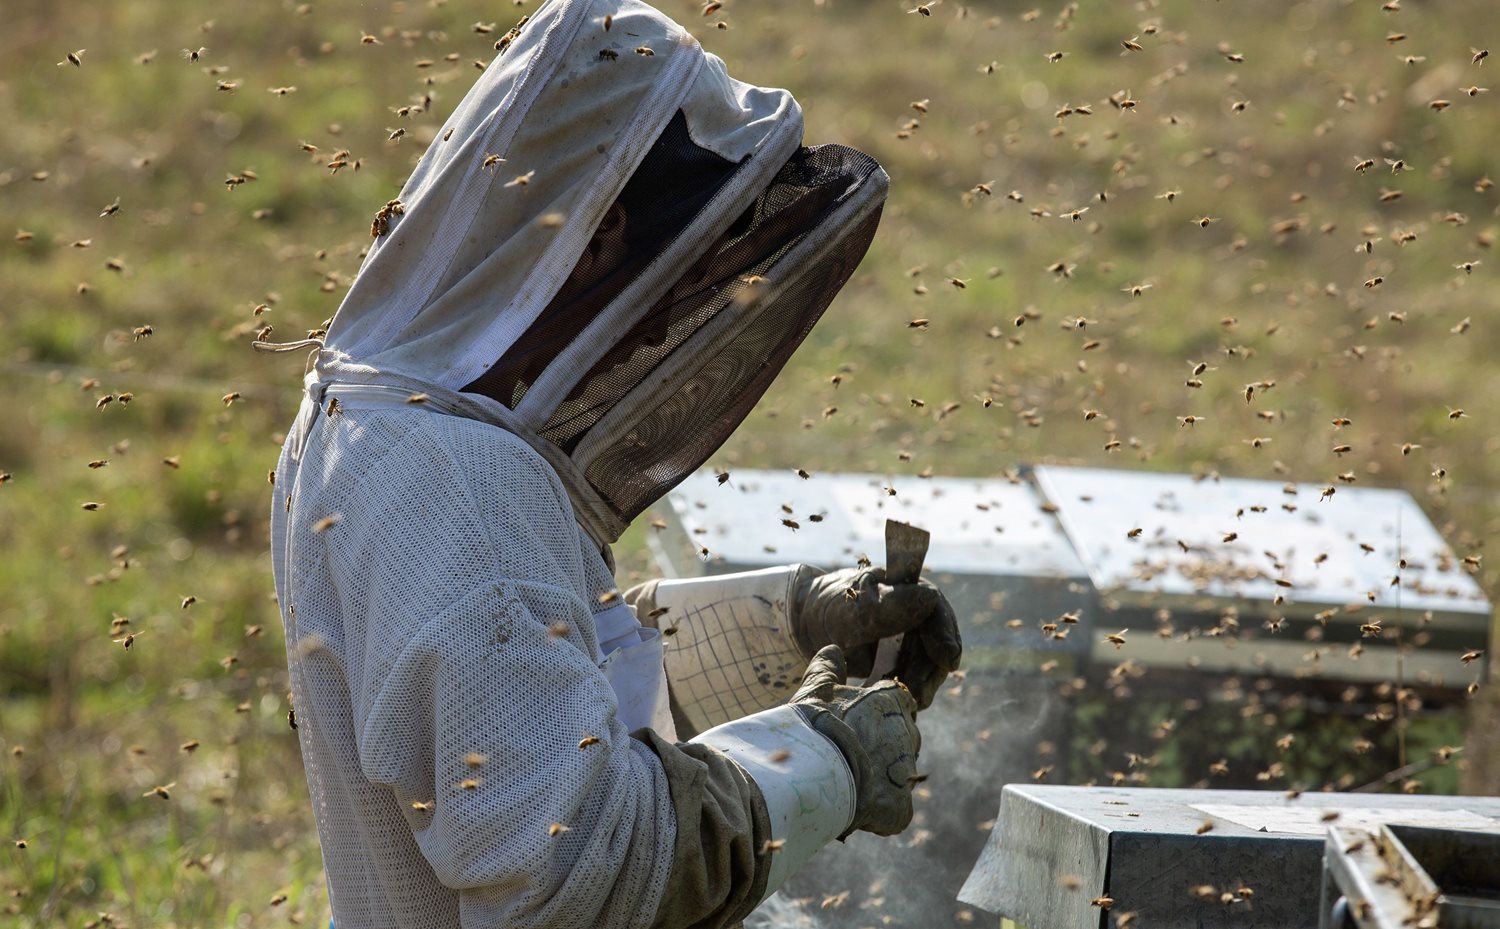 A side shot of a beekeeper in full protective white clothing, preparing to pull out a section of beehive honeycomb